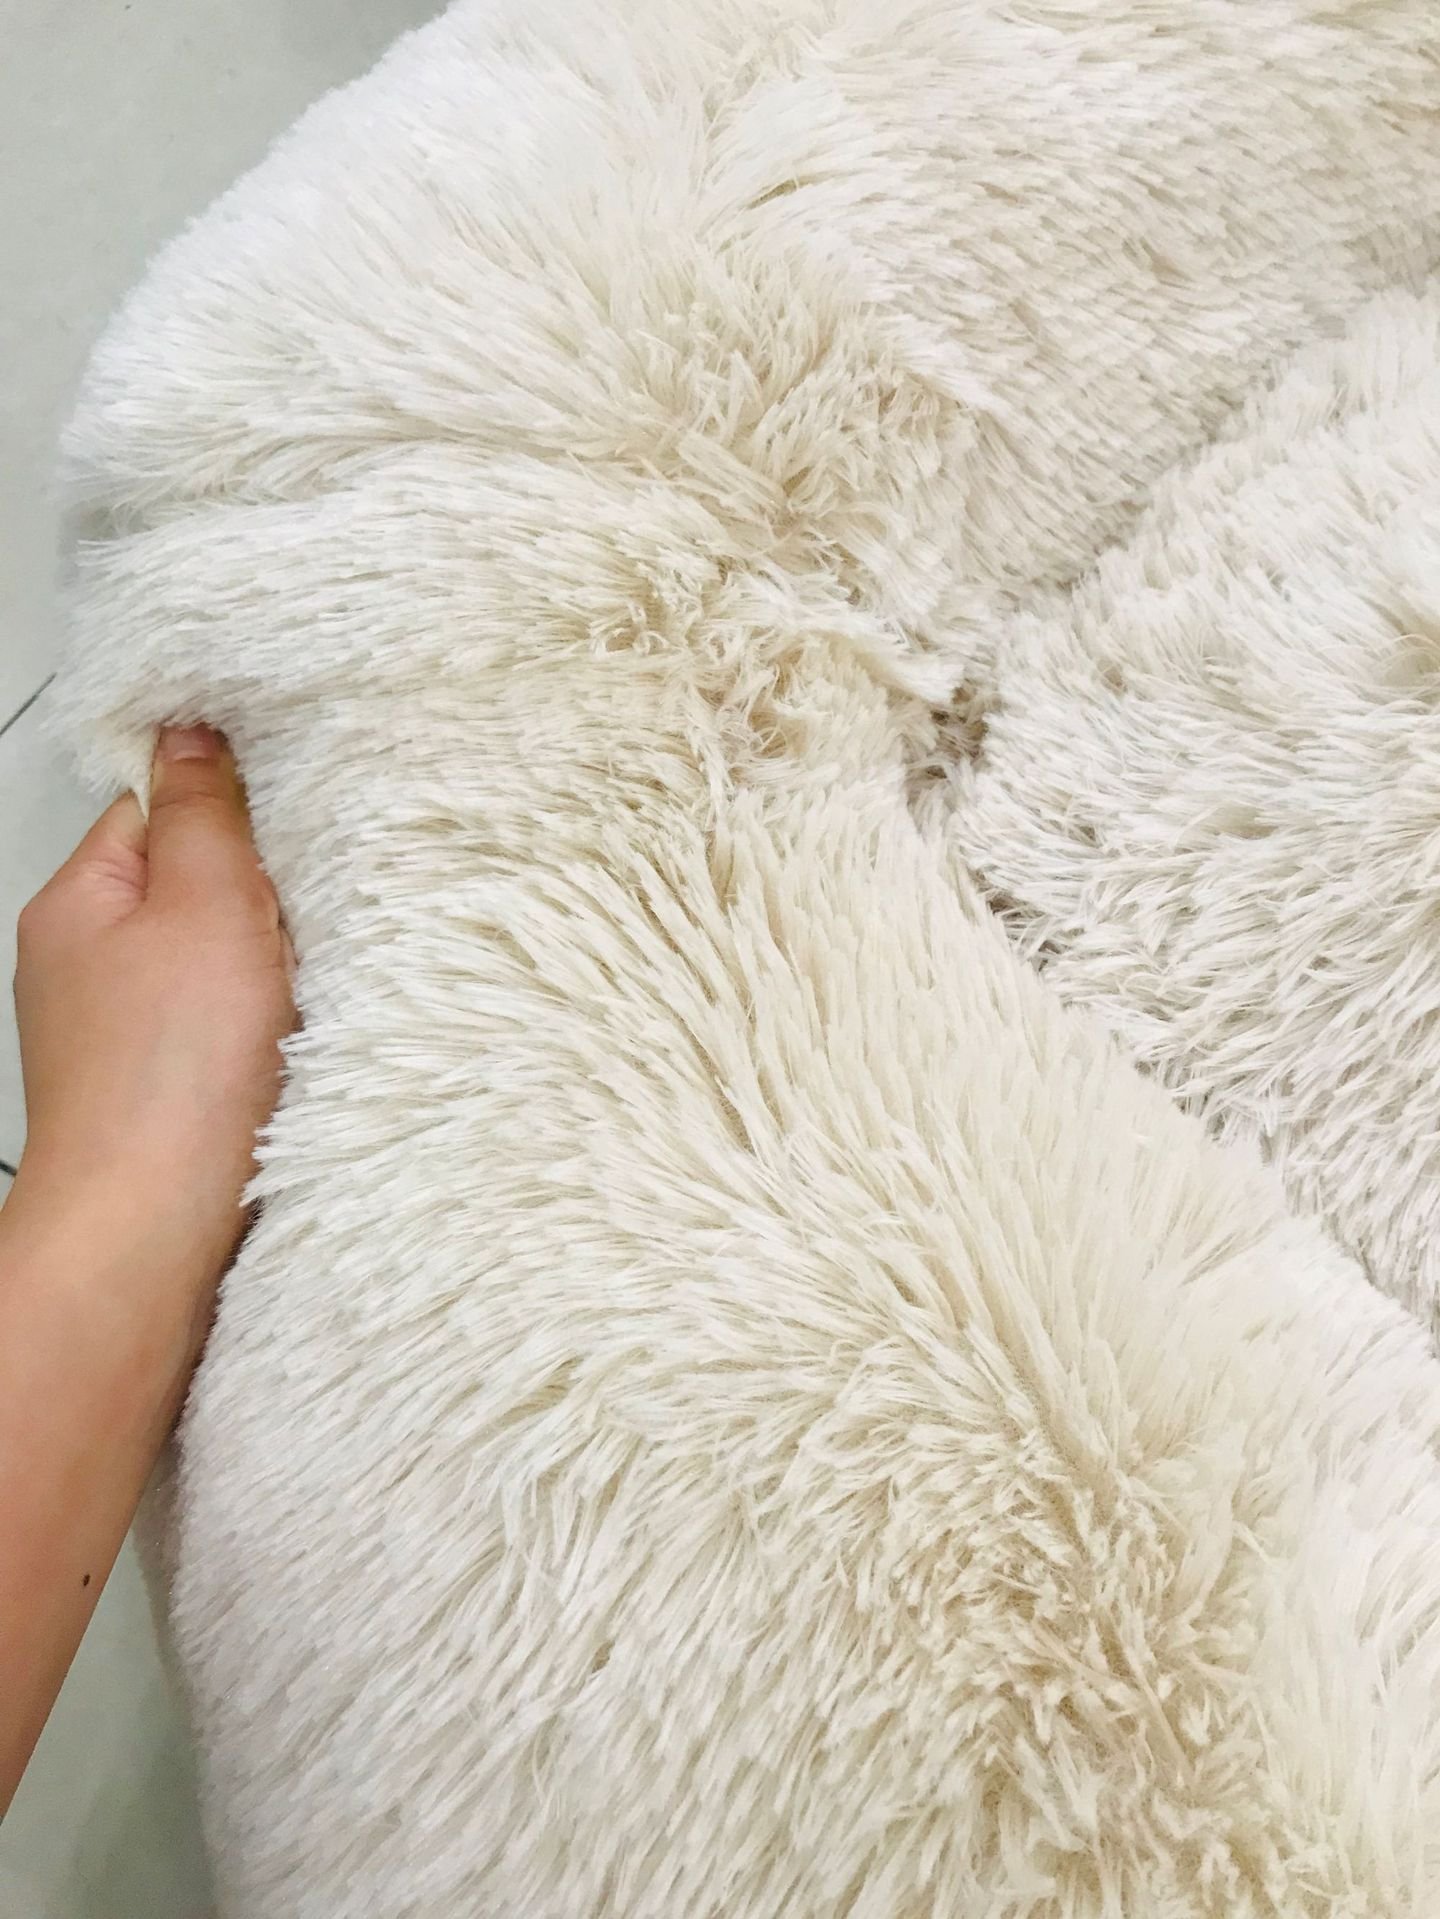 Round Plush Soft Bed for Pets